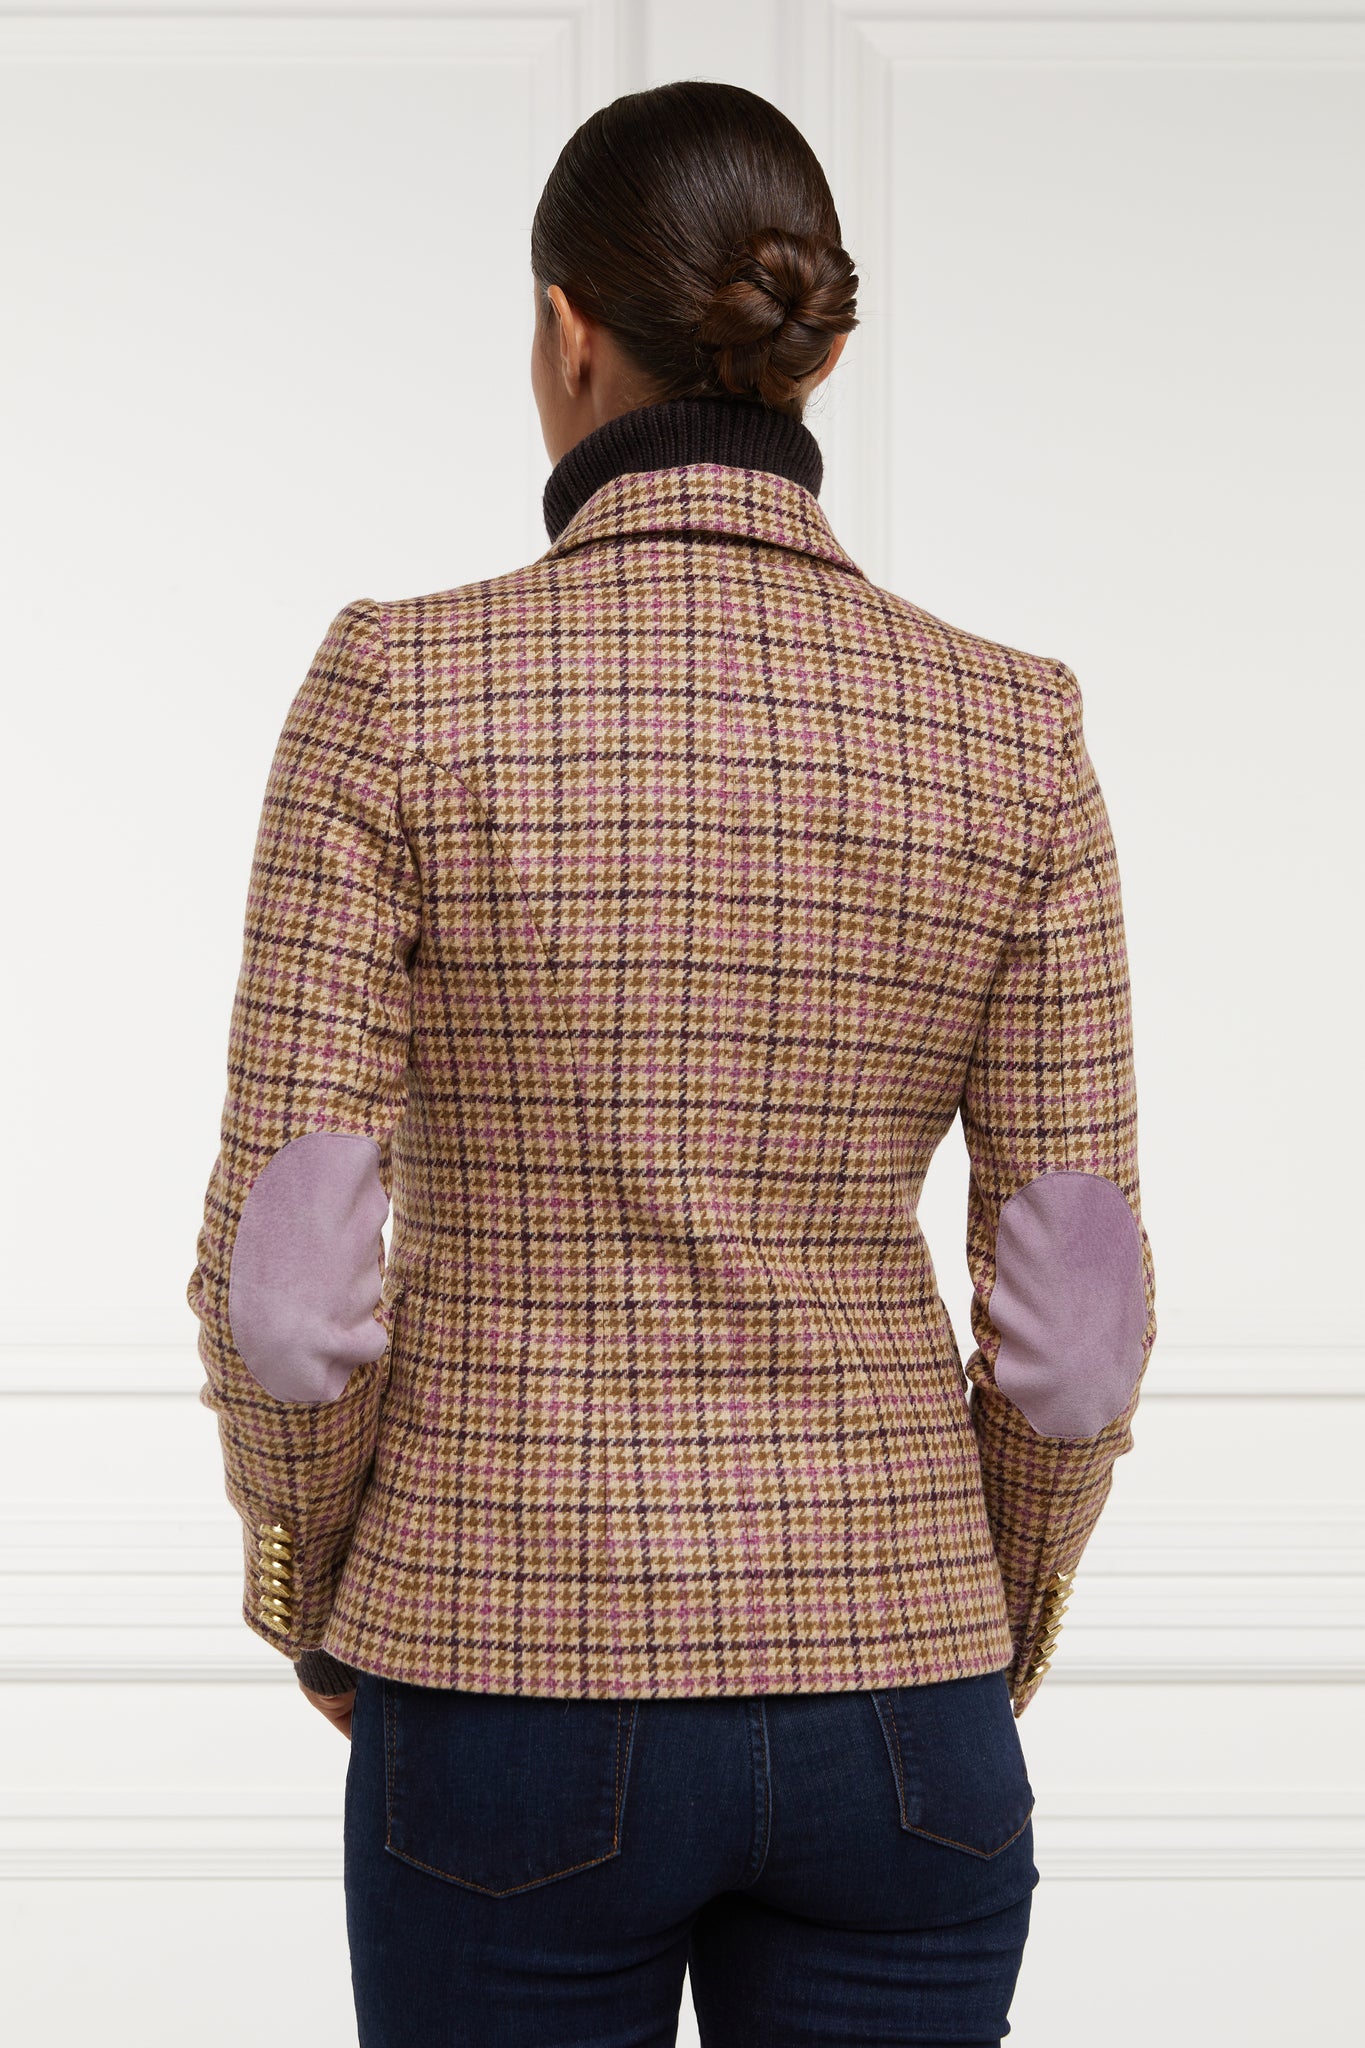 back of British made double breasted blazer that fastens with a single button hole to create a more form fitting silhouette with two pockets and gold button detailing this blazer is made from pink purple and brown check houndstooth fabric highlighting pale pink suede elbow patches